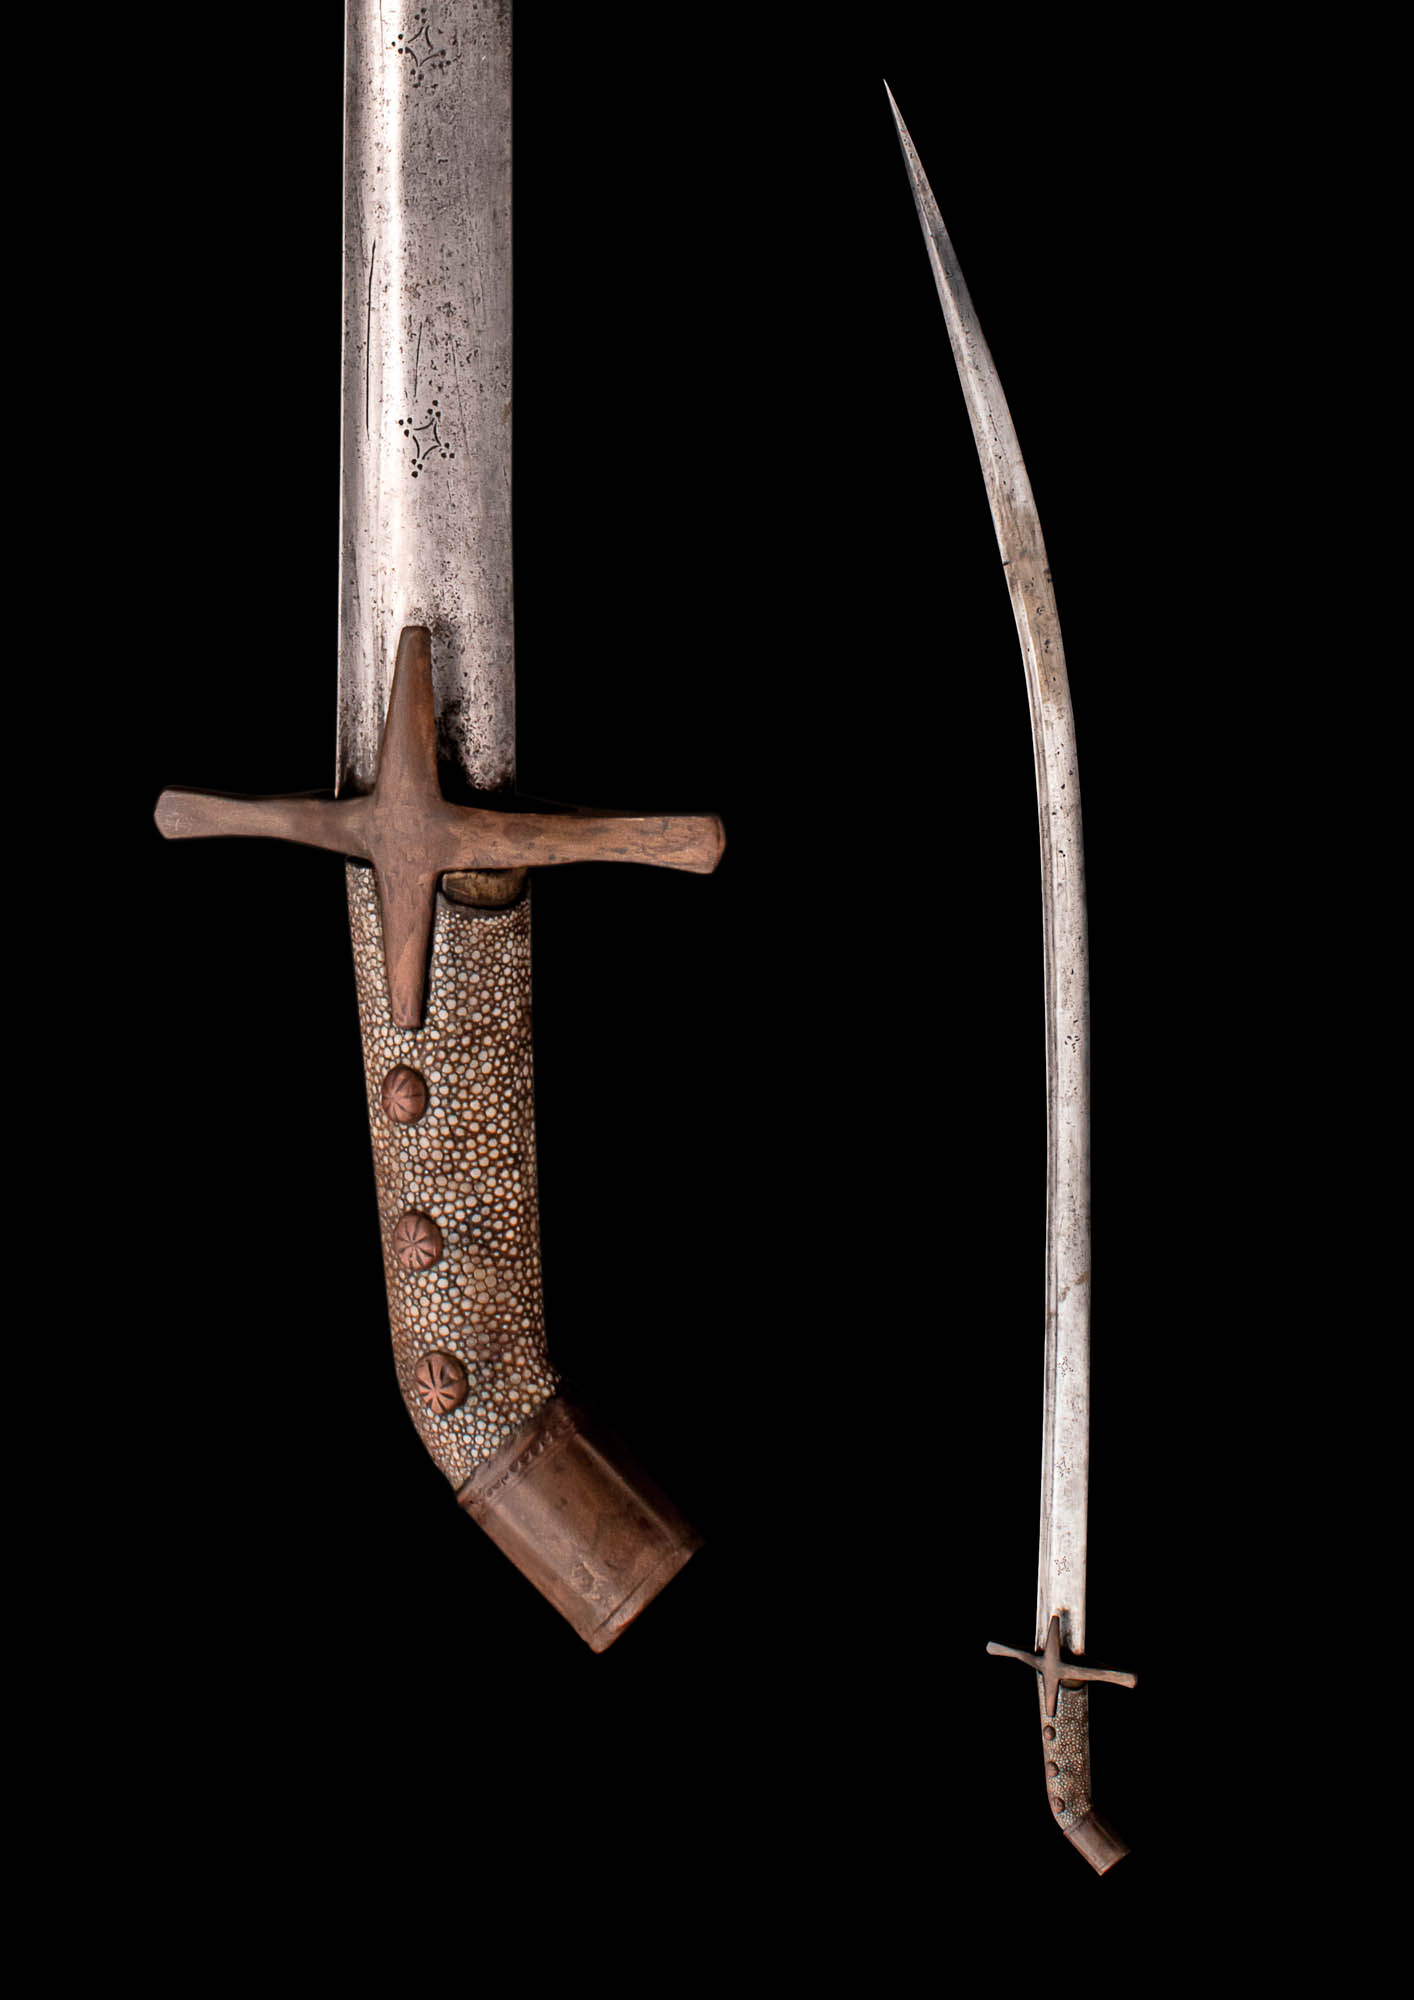 TATAR SABER SWORD DECORATED WITH RHOMBS